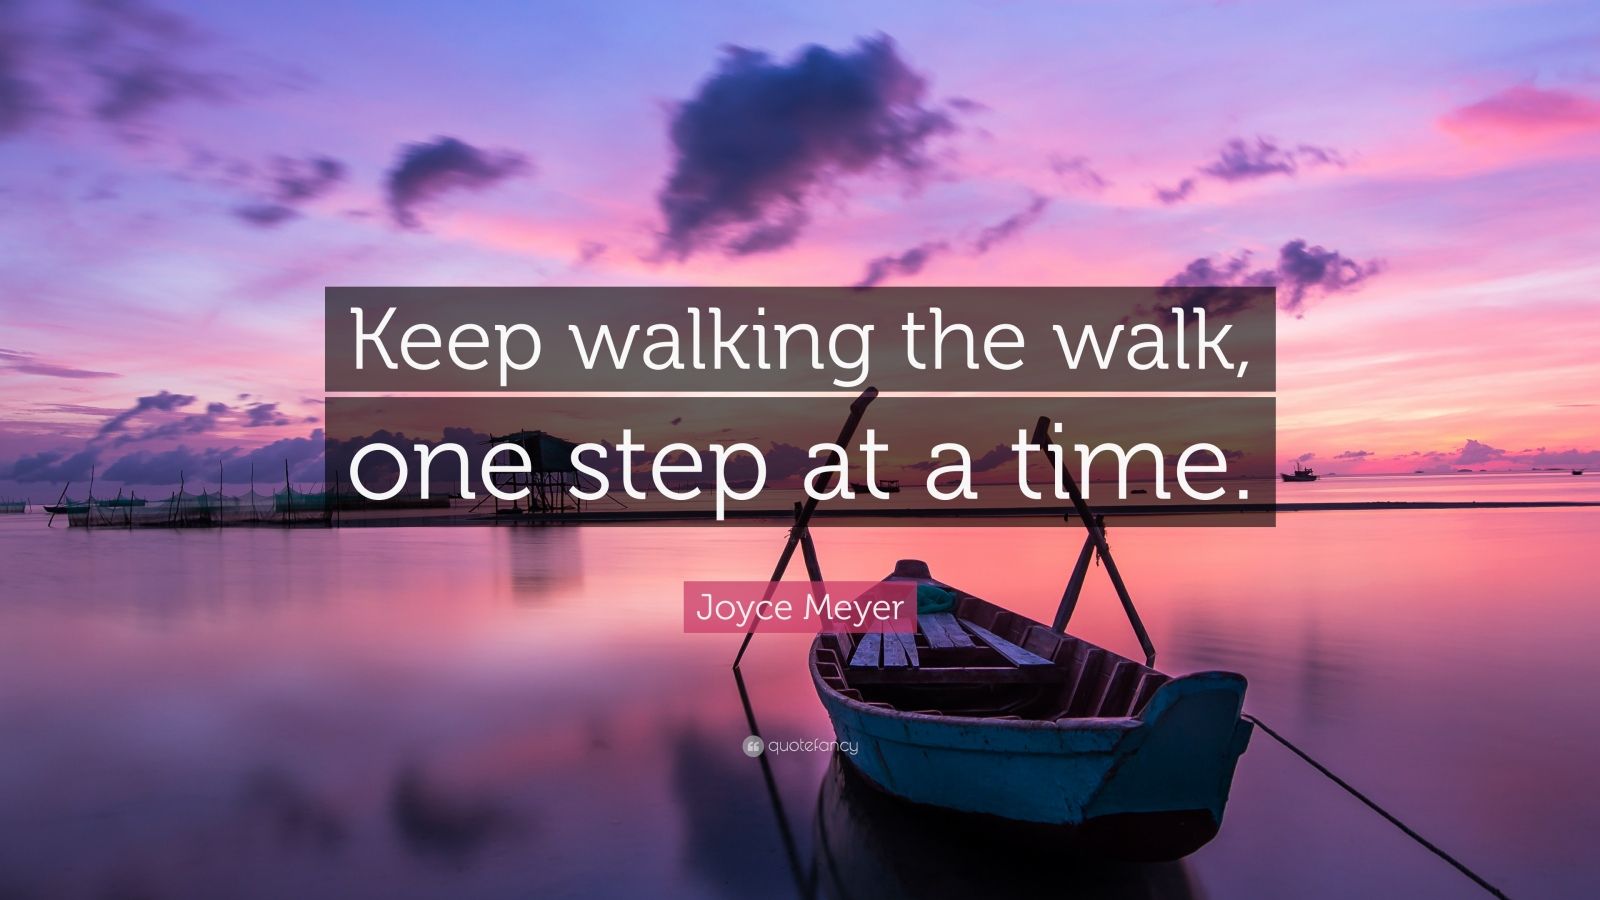 Joyce Meyer Quote: “Keep walking the walk, one step at a time.” (12 ...